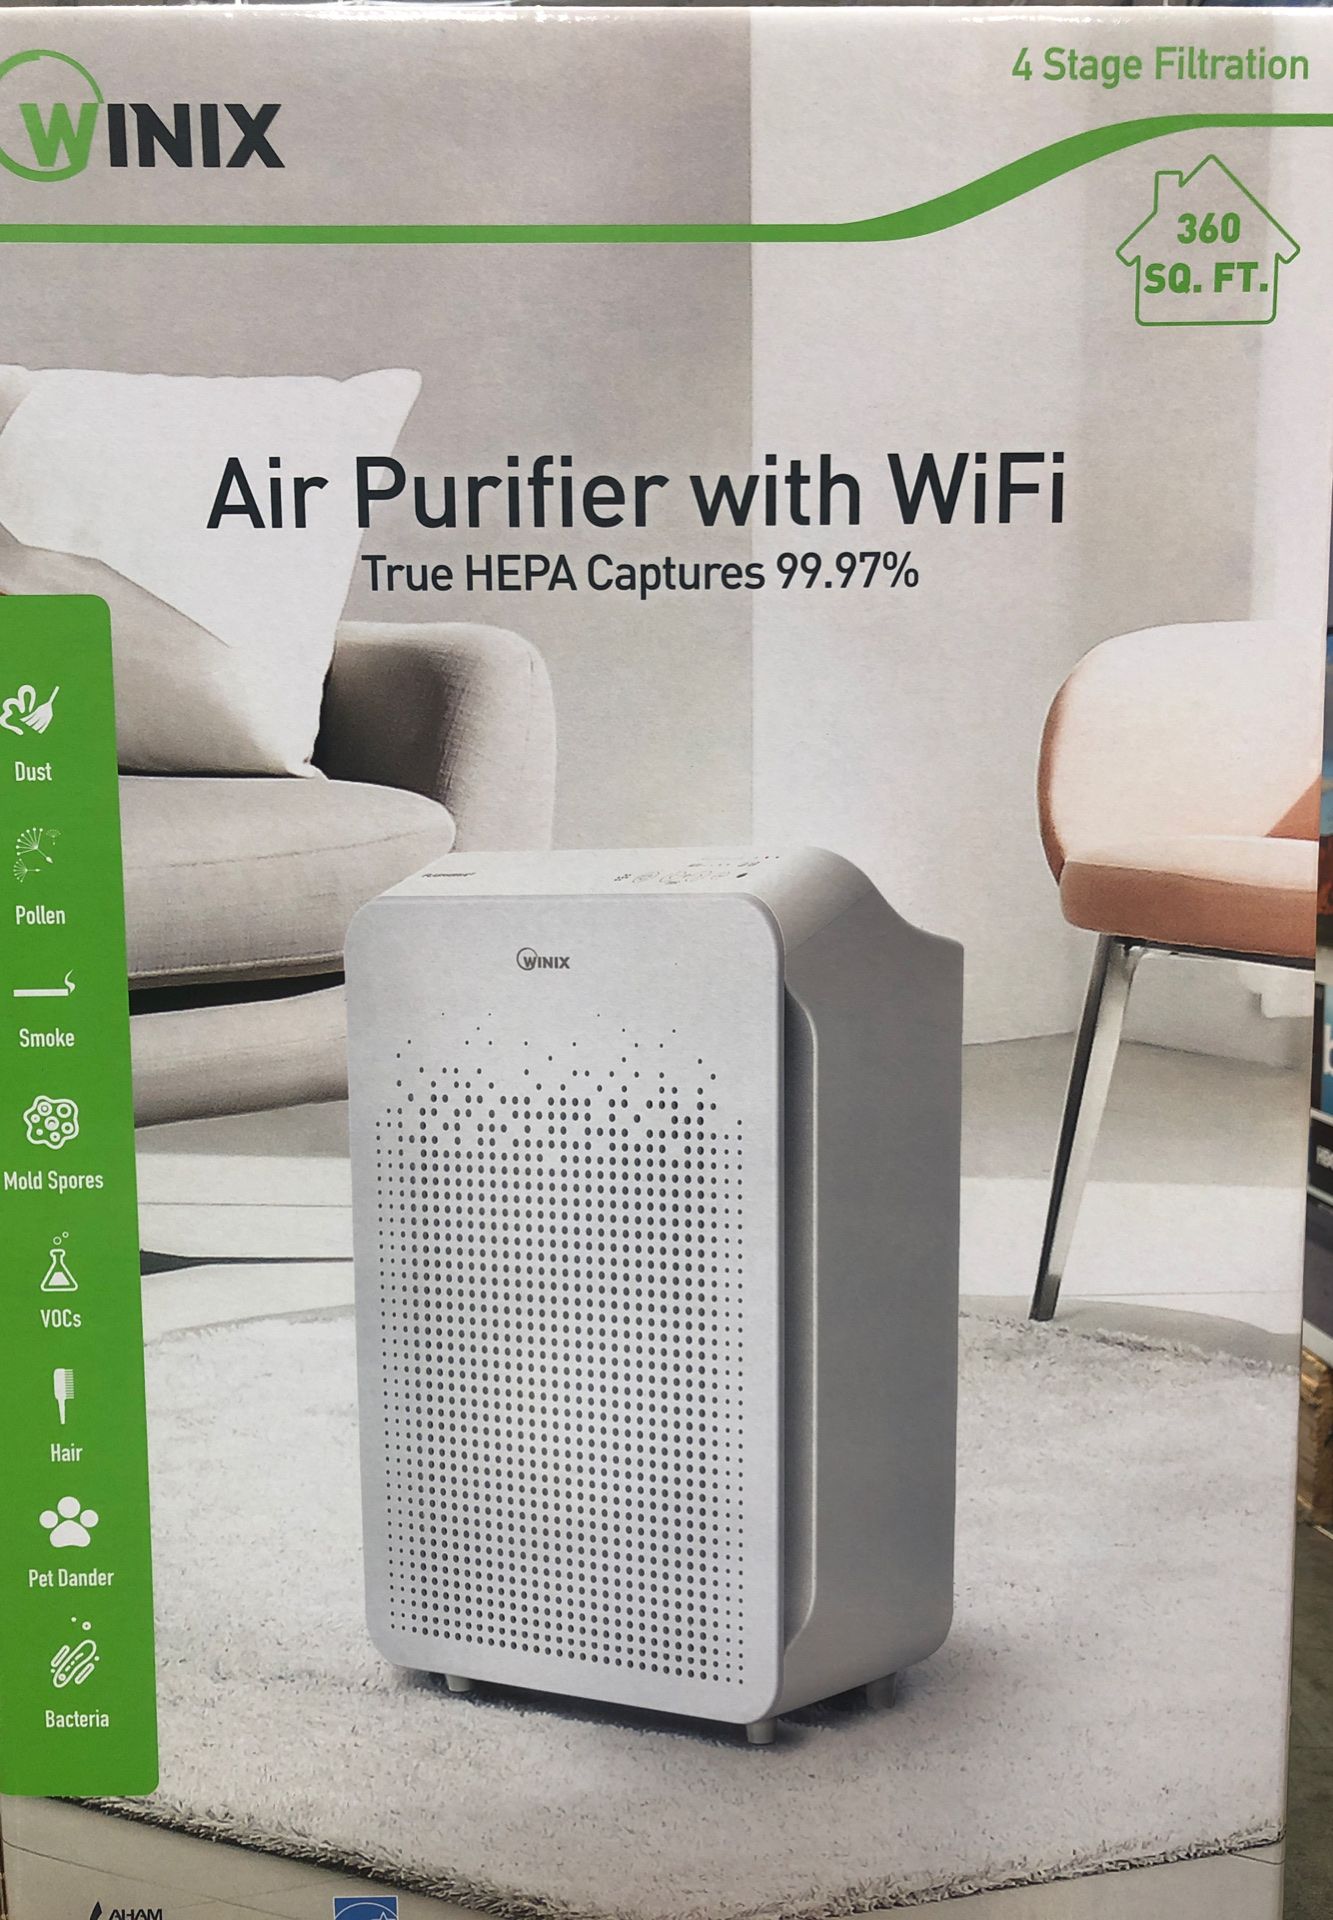 Winix air purifier with WIFI ***Special price $179.99